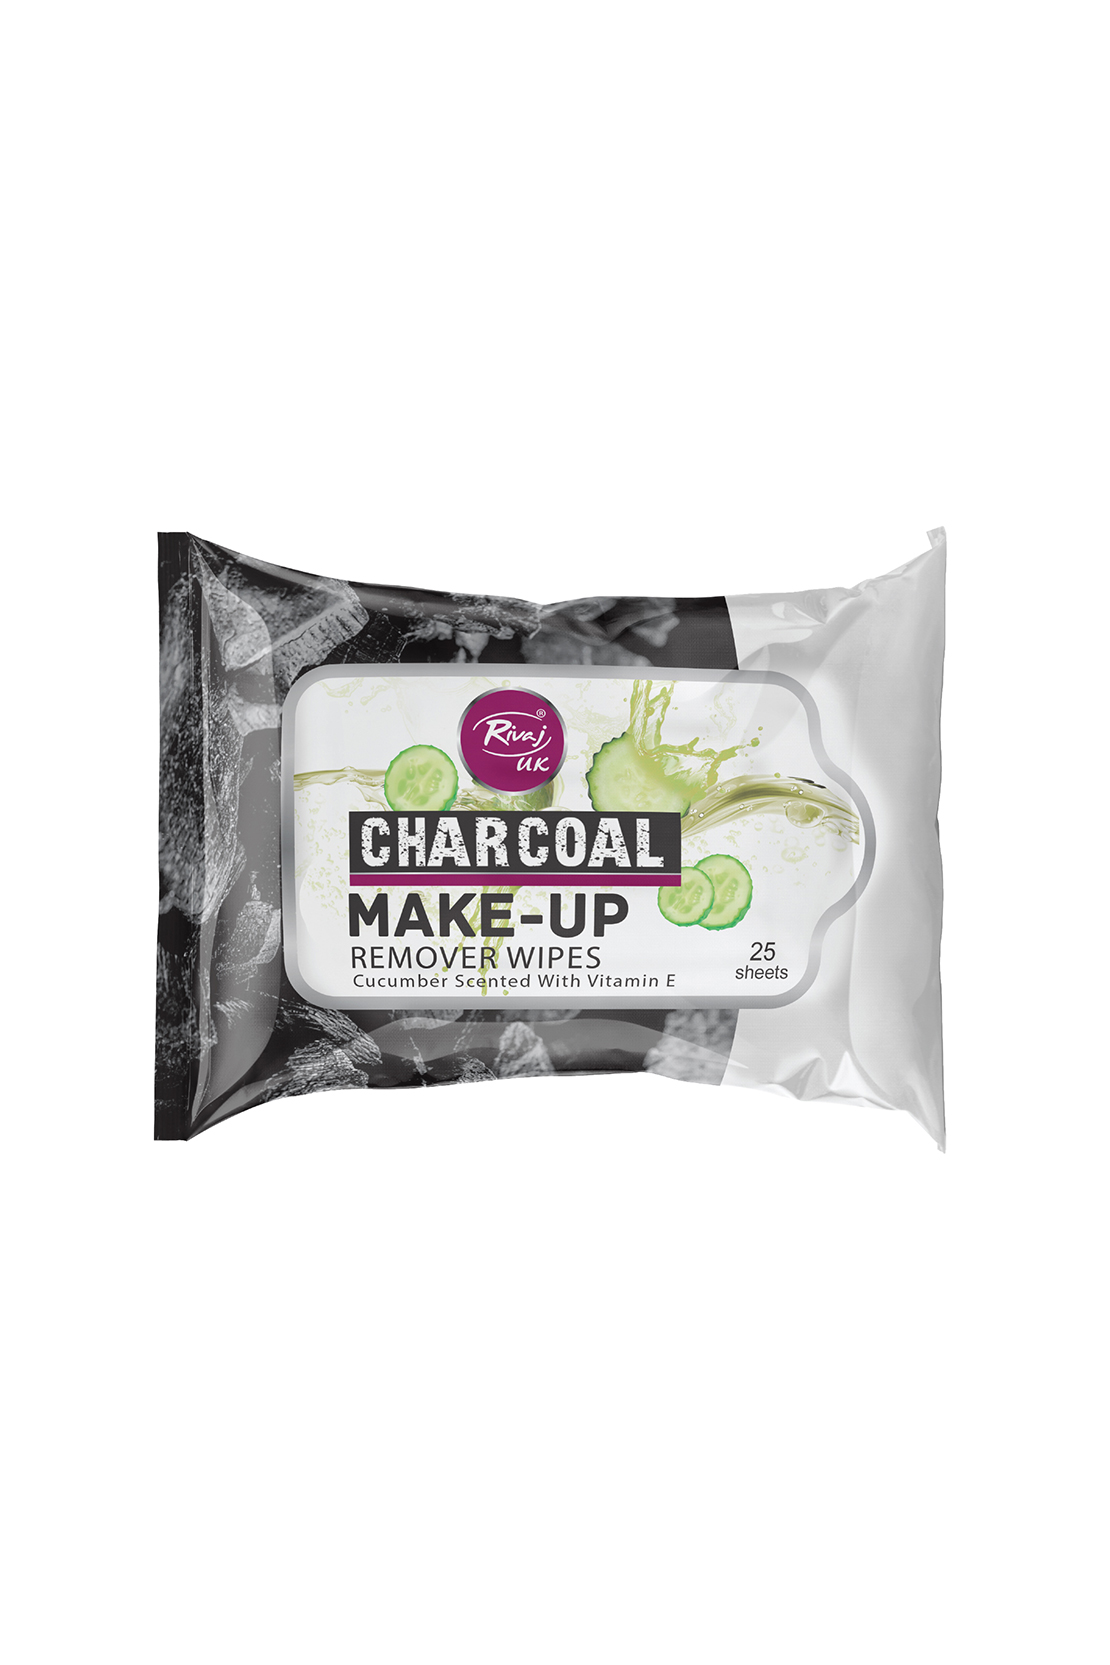 Charcoal Make-Up Remover Wipes